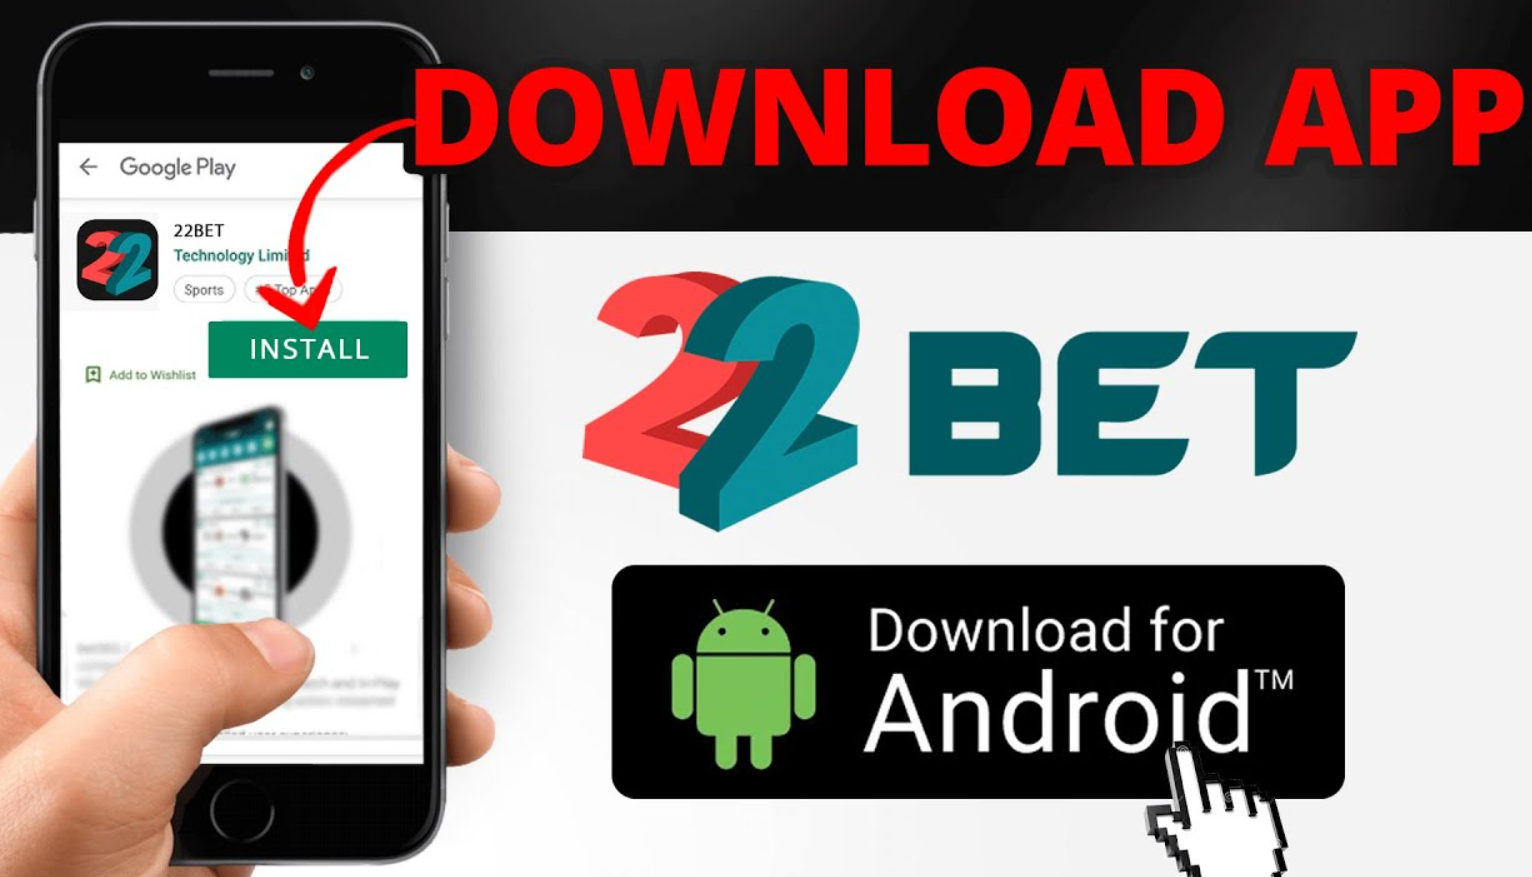 The 22bet app tz: a review of the features and possibilities